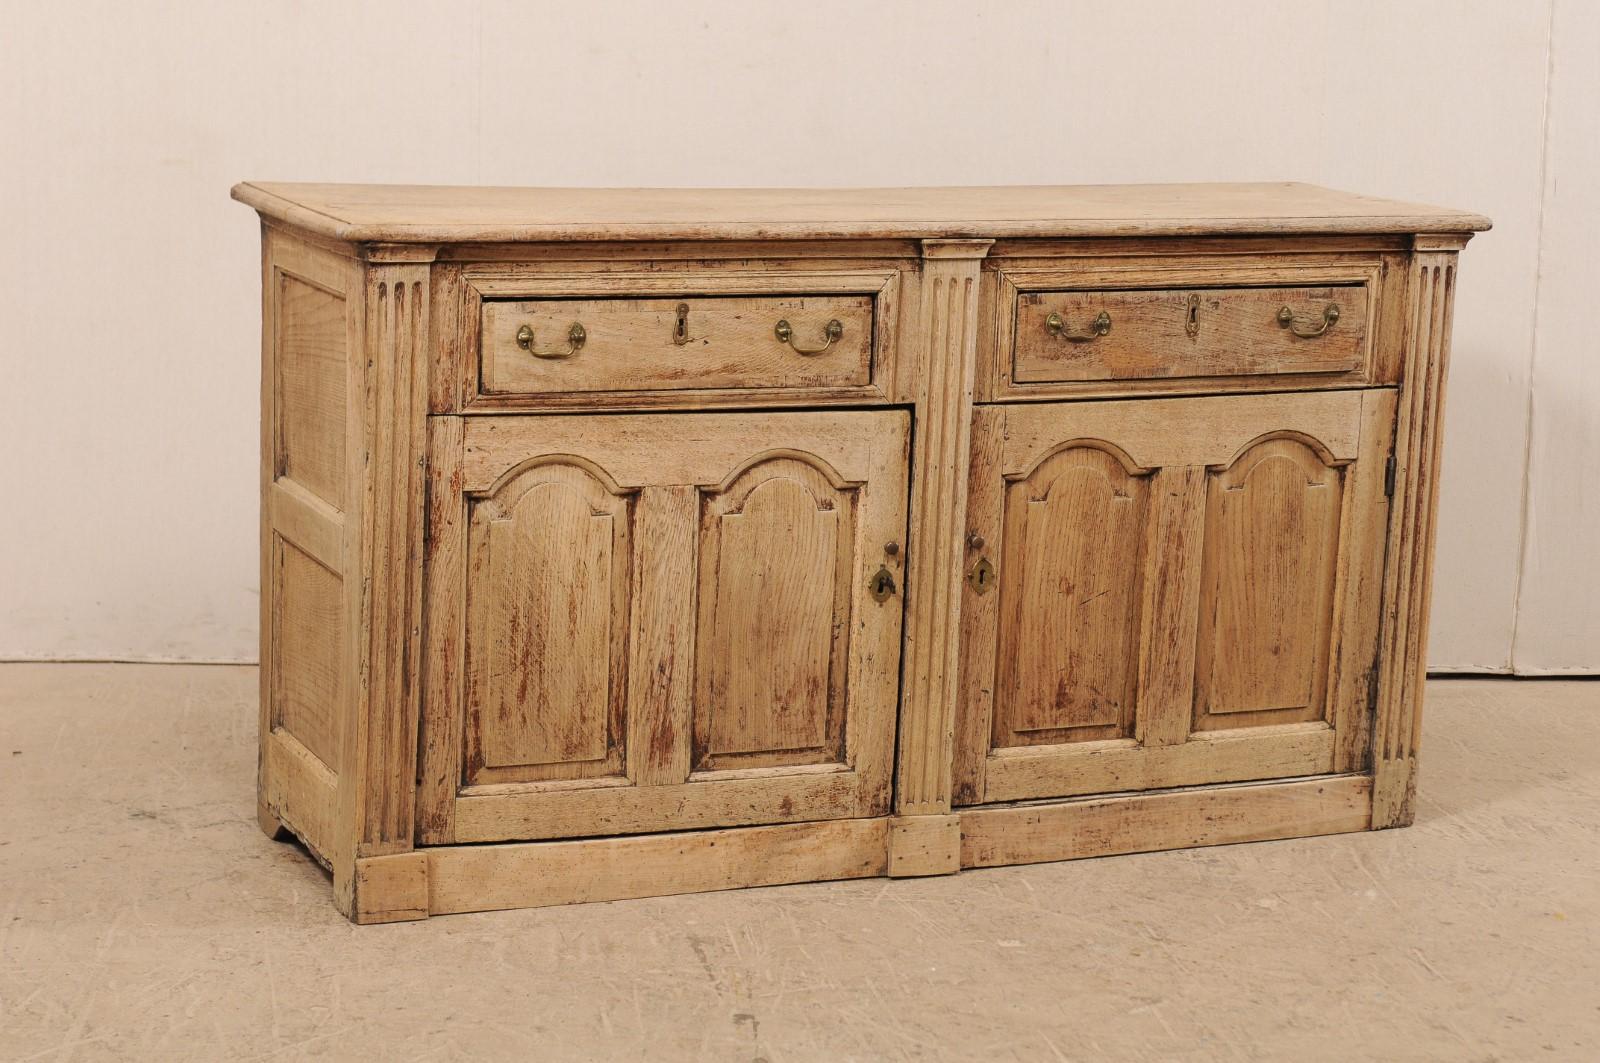 A 19th century English carved wood buffet cabinet with fluted columns. This antique cabinet from England, which is approximately 5.5 feet in length, features a slightly overhung rectangular-shaped top which rests atop a case having two half-drawers